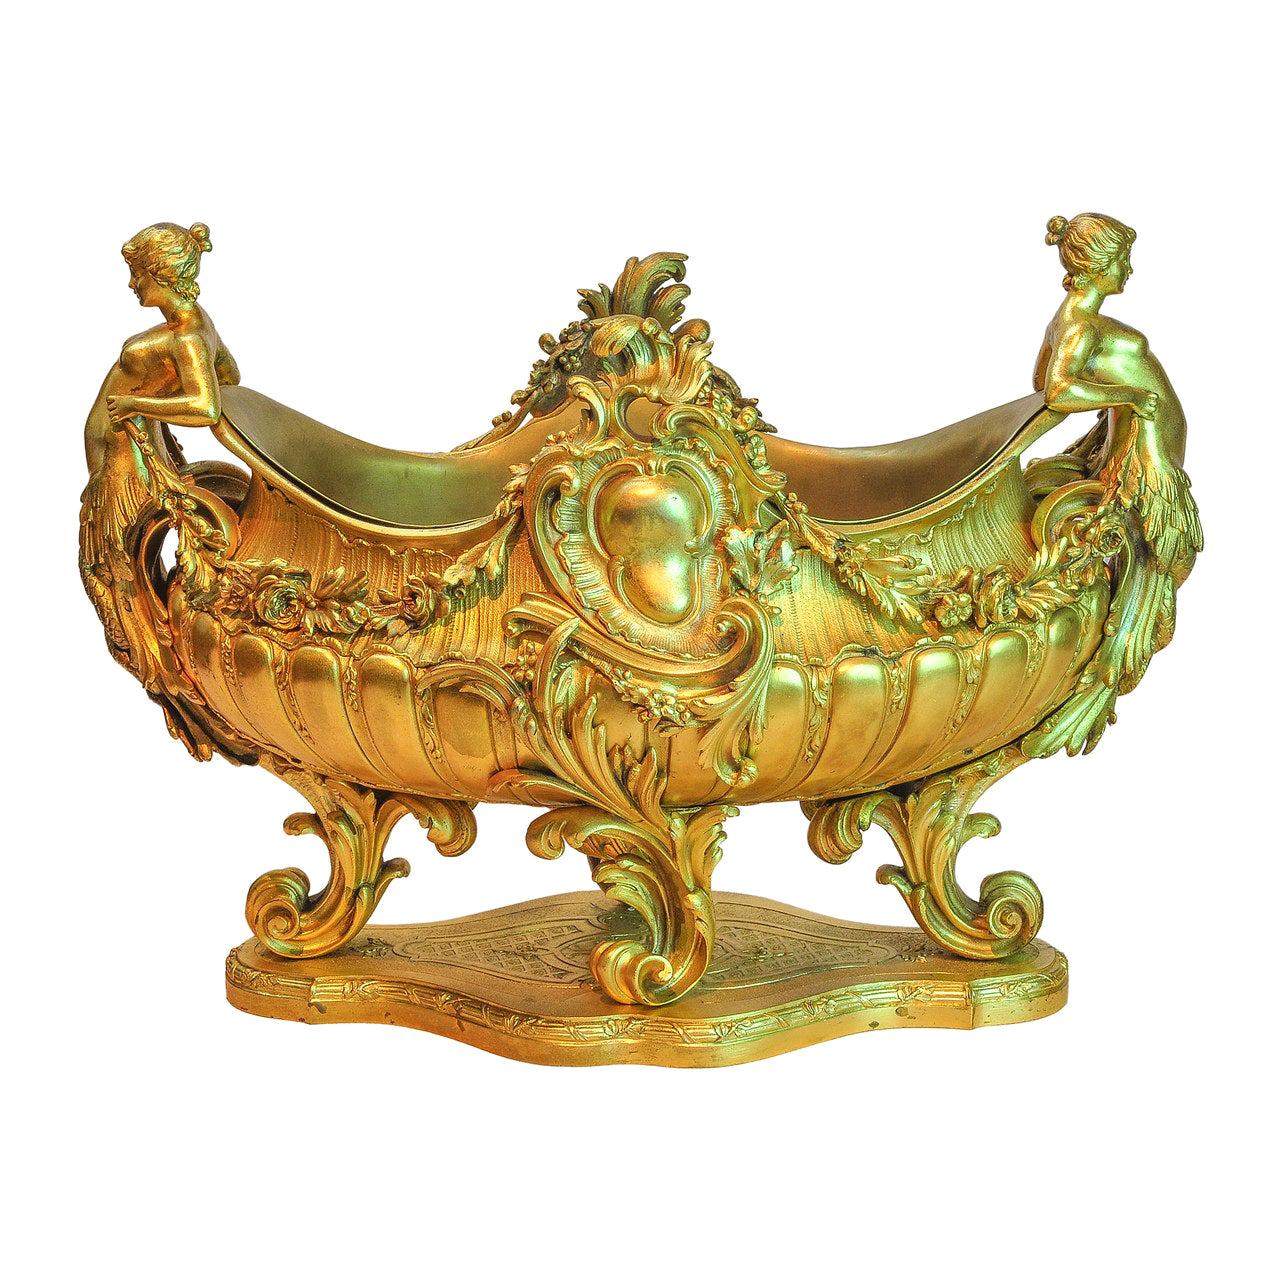 19th Century French Gilt Bronze Centerpiece with Mermaid Figural Handles